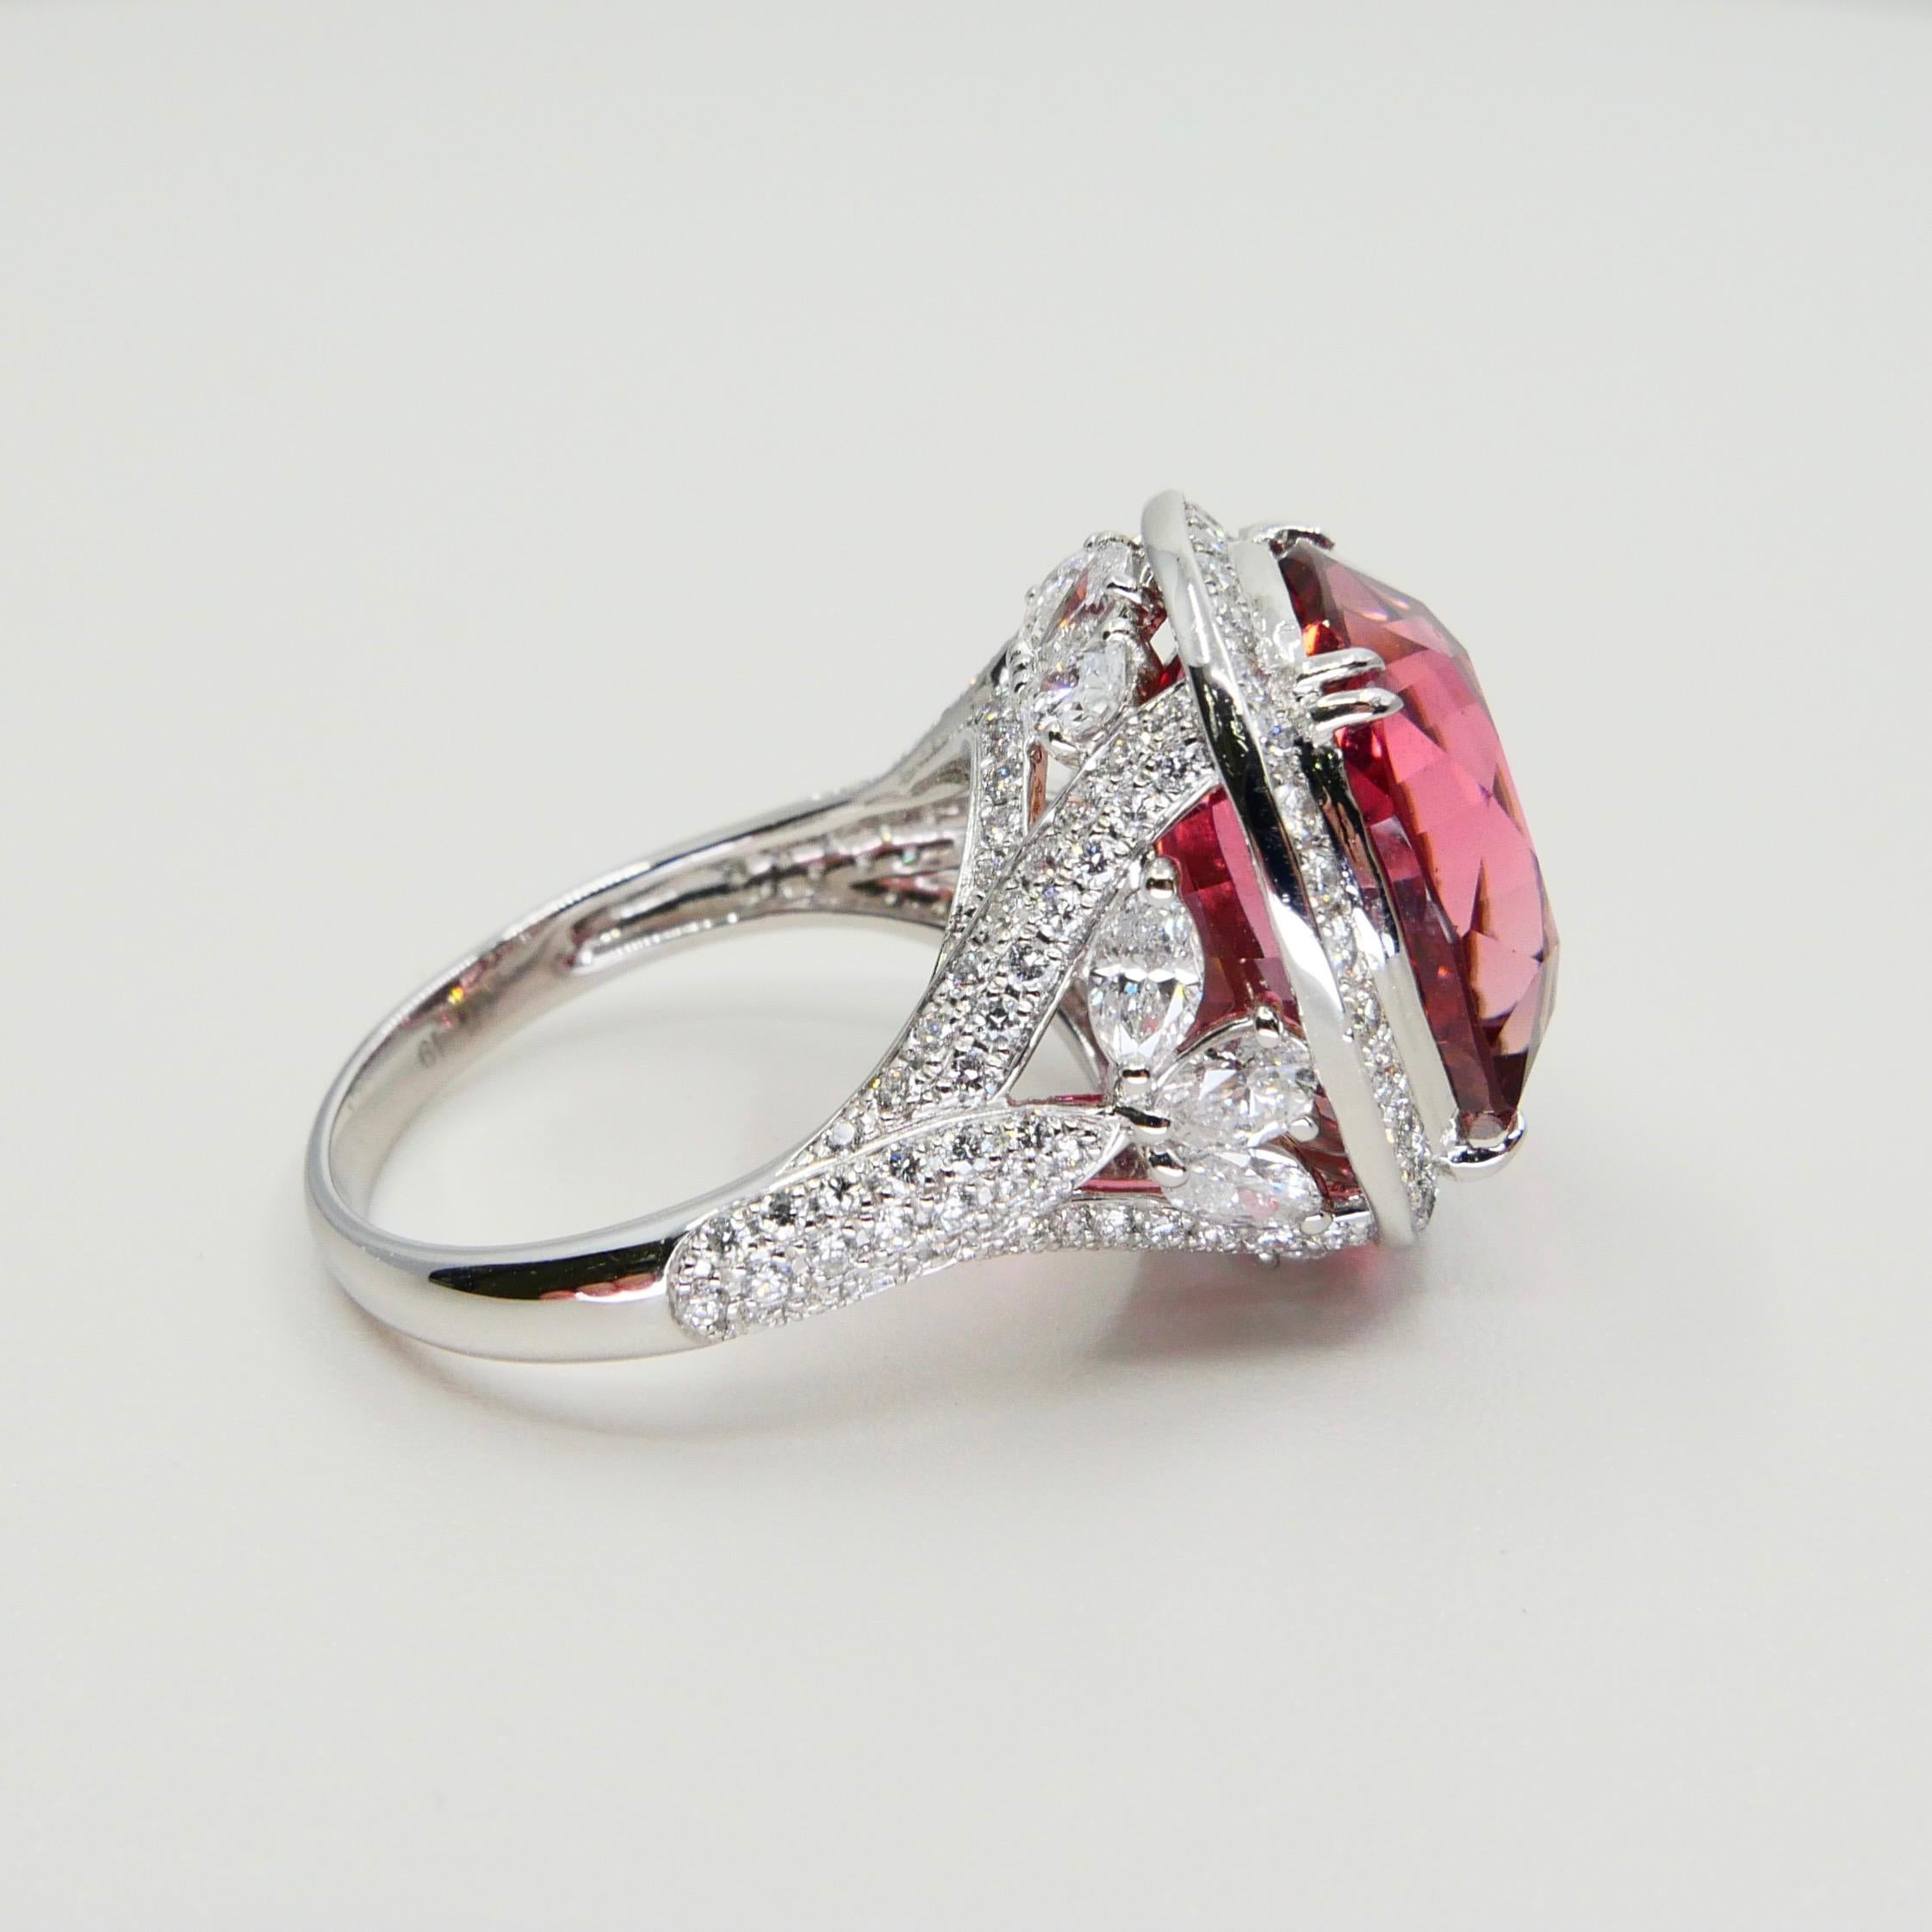 Natural 17 Cts Pink Tourmaline and Diamond Cocktail Ring, Huge Statement Piece For Sale 9